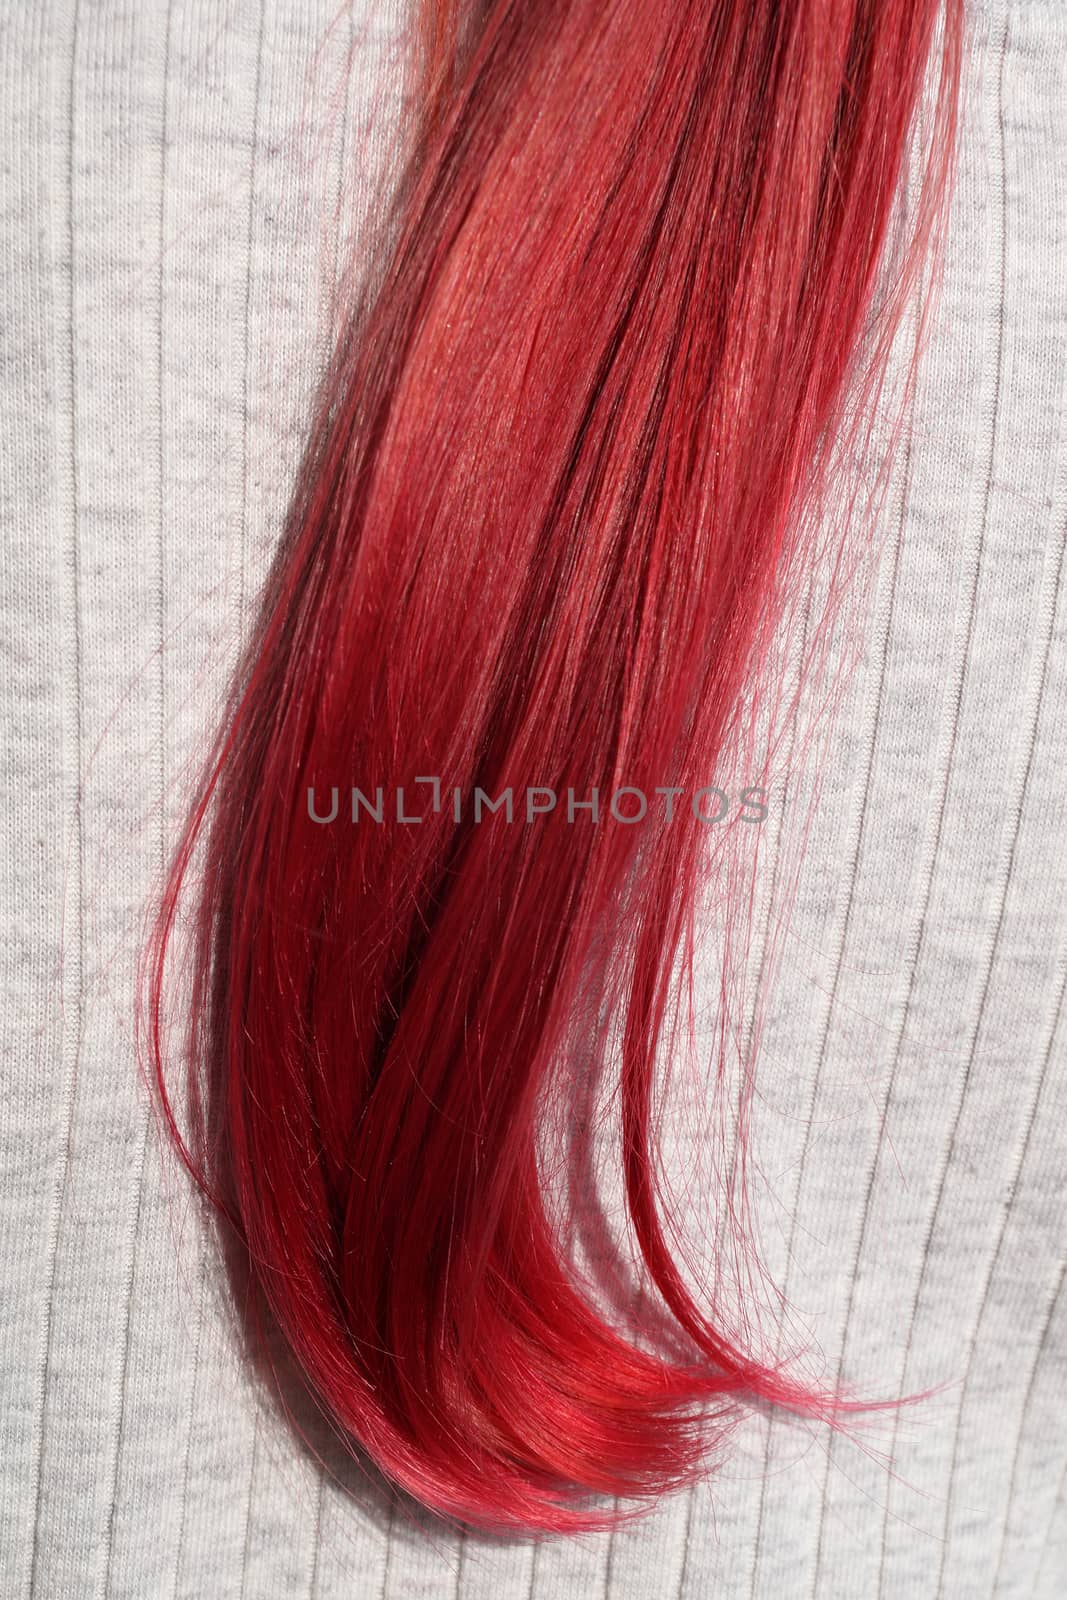 strand of dyed red female hair on a light background close-up